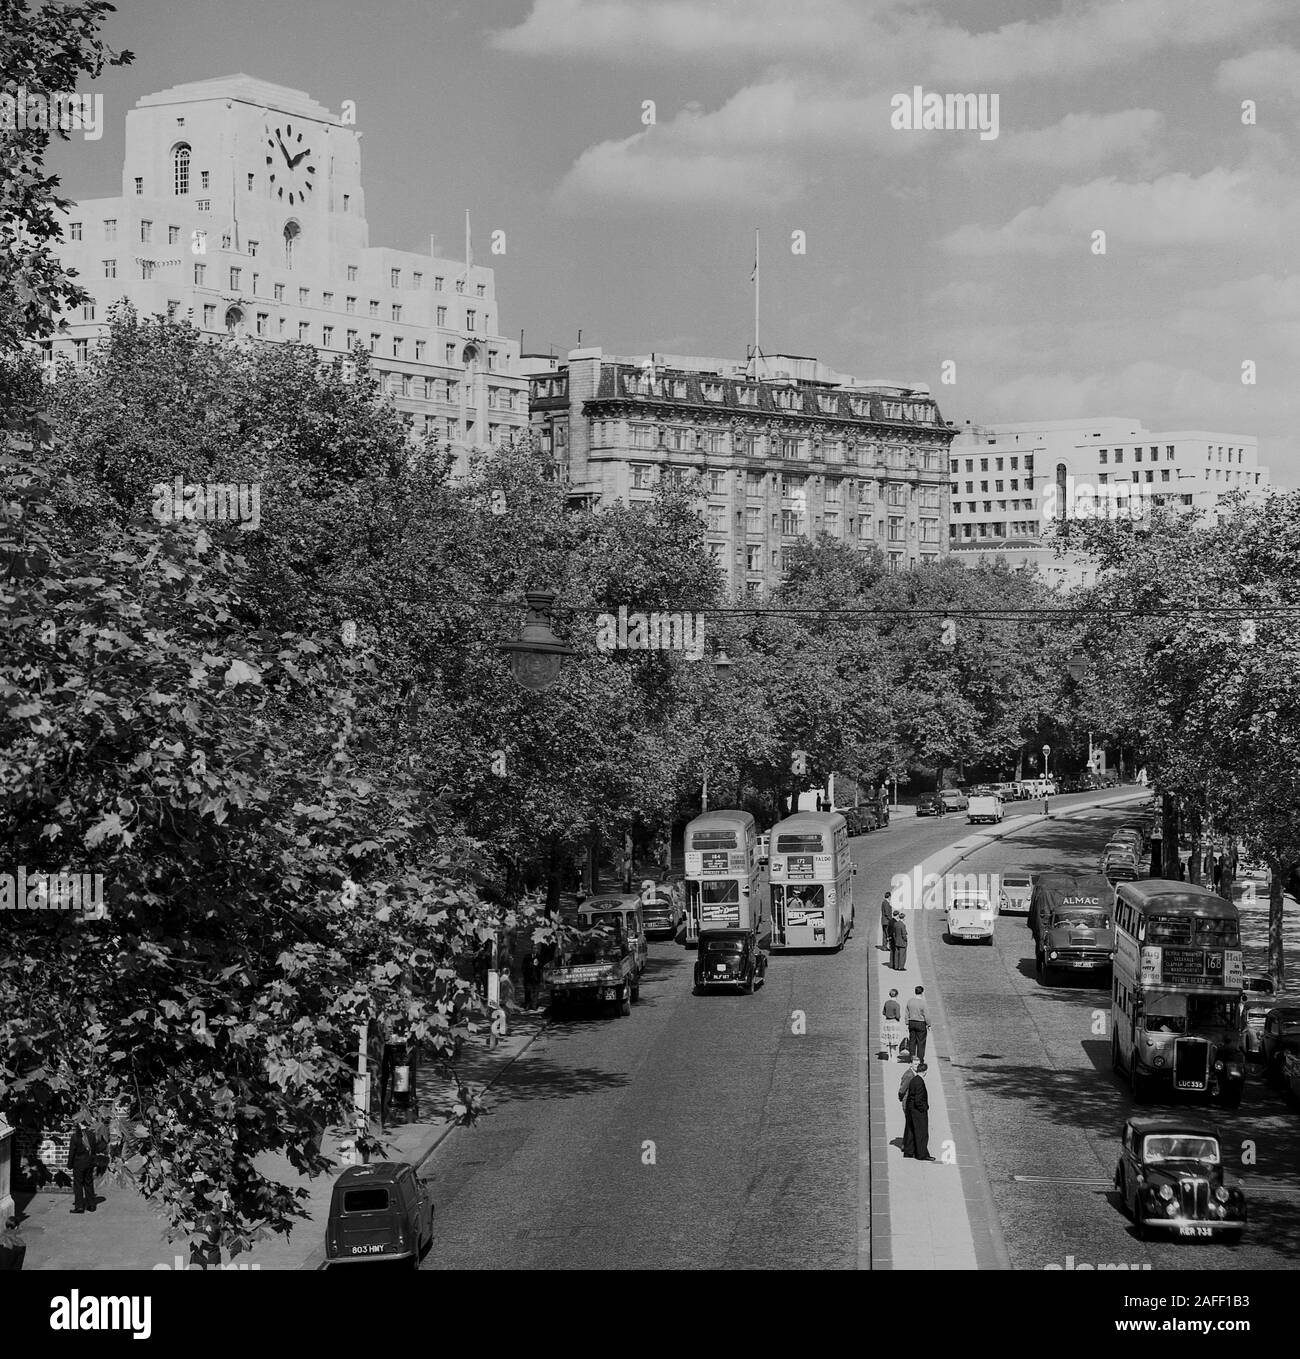 1960s, historical, Victoria Embarkment, London, England, UK, showing the cars and routemaster buses of the era. Overlooking the road, Shelll Mex house. Stock Photo